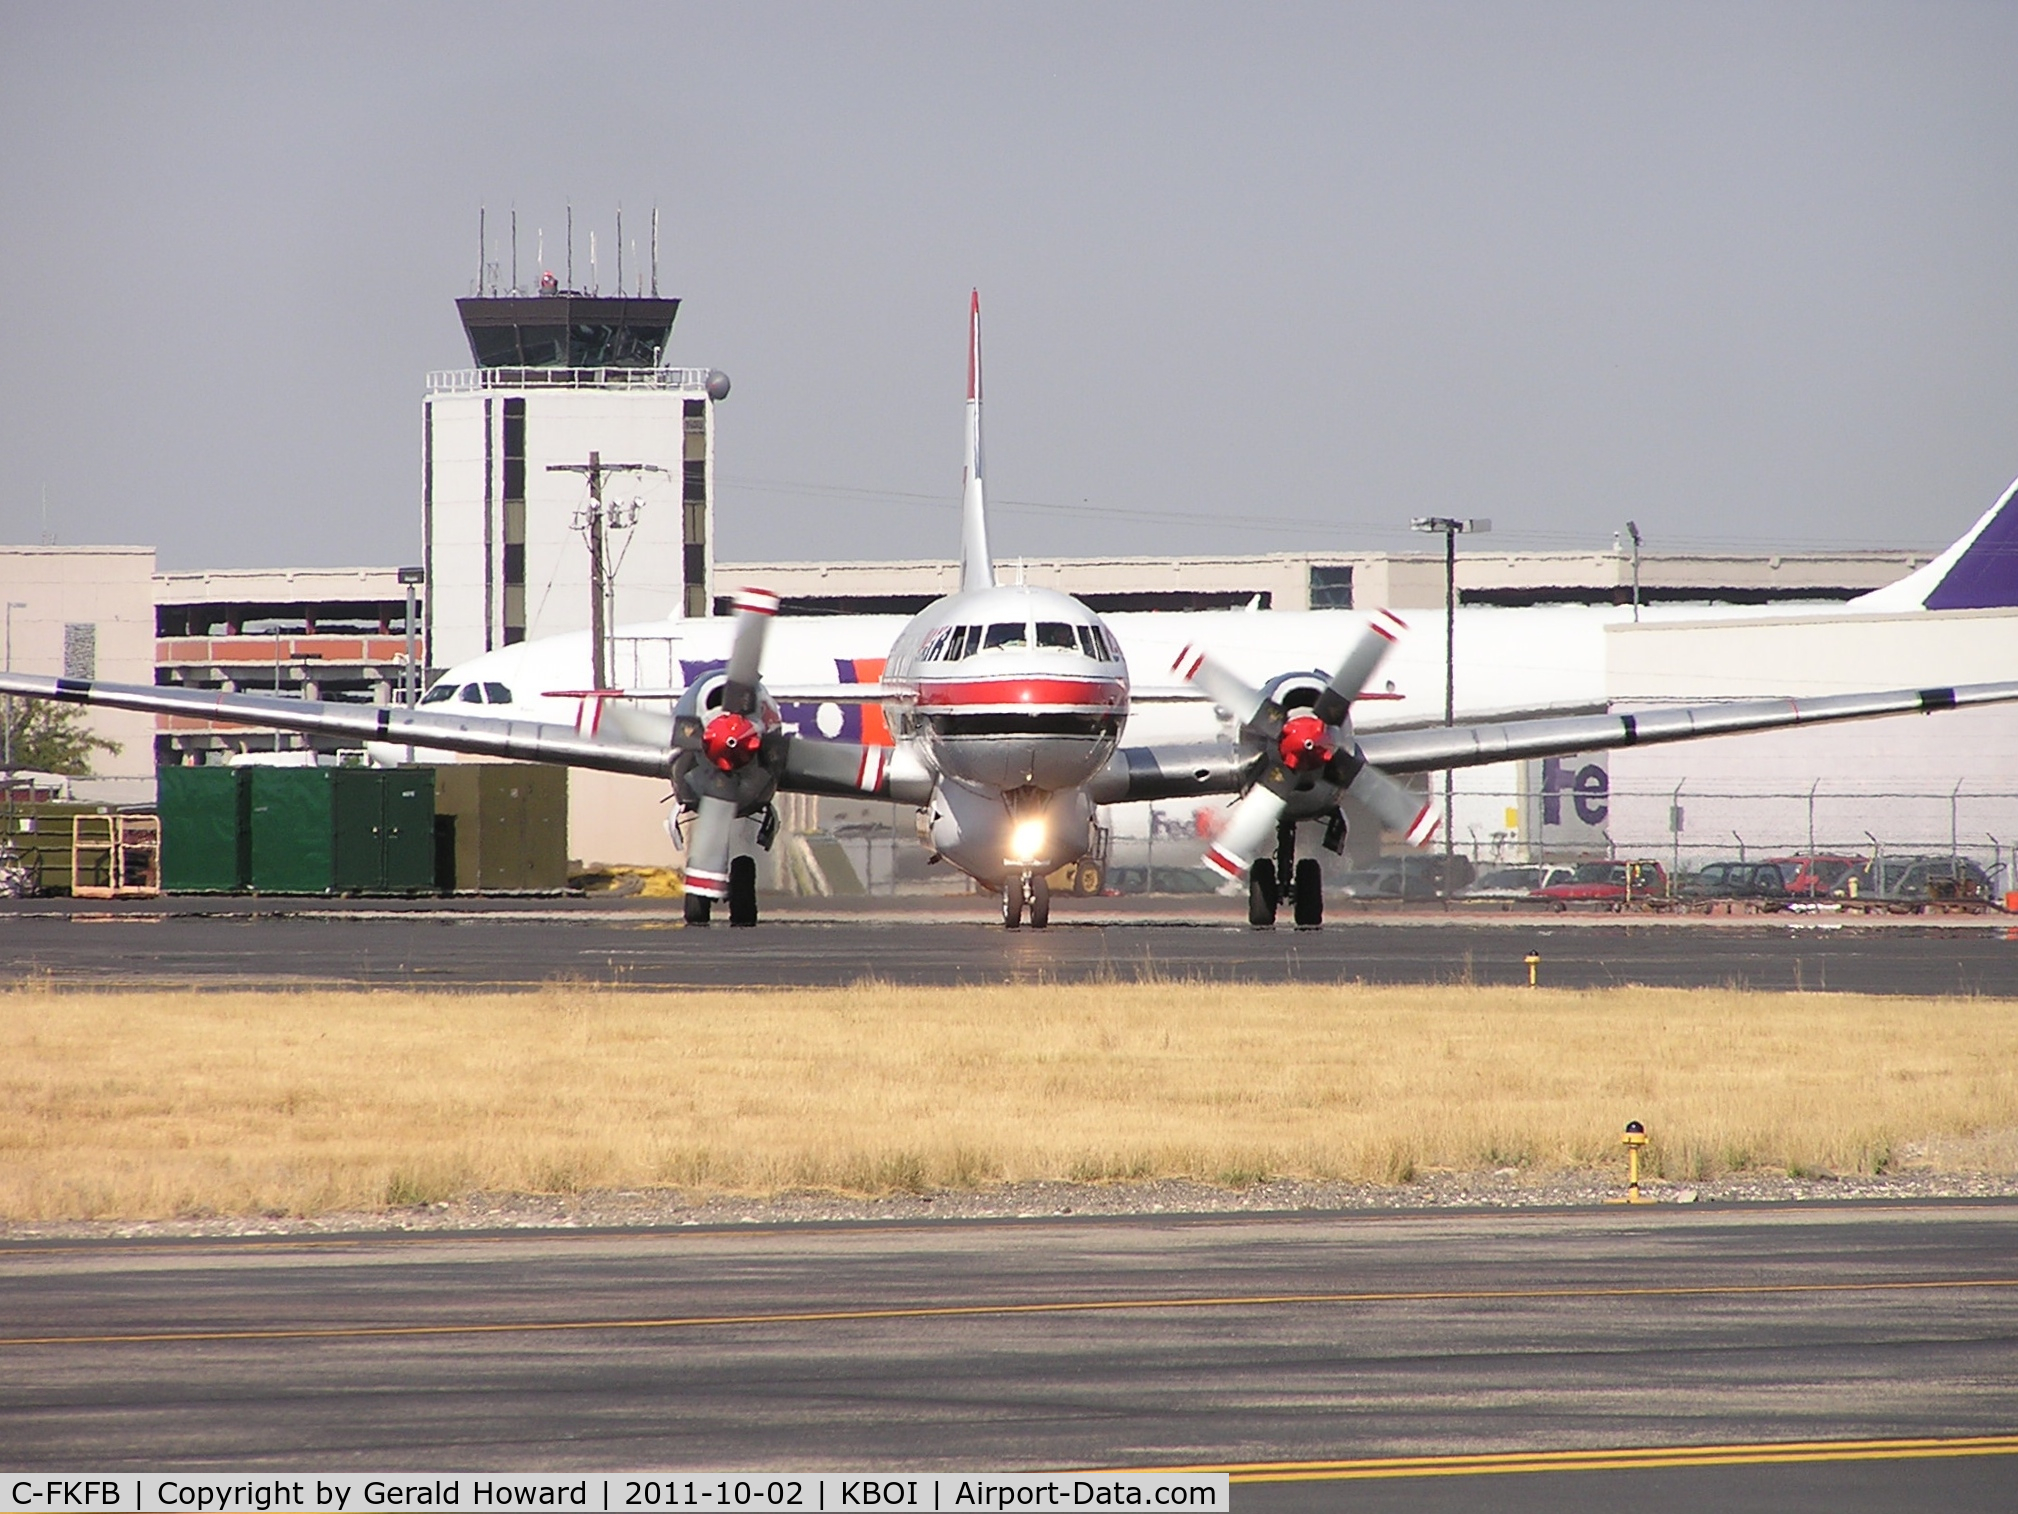 C-FKFB, 1953 Convair 340-31 C/N 57, Taxing out from NIFC ramp. Old control tower in background. Torn down several years later.